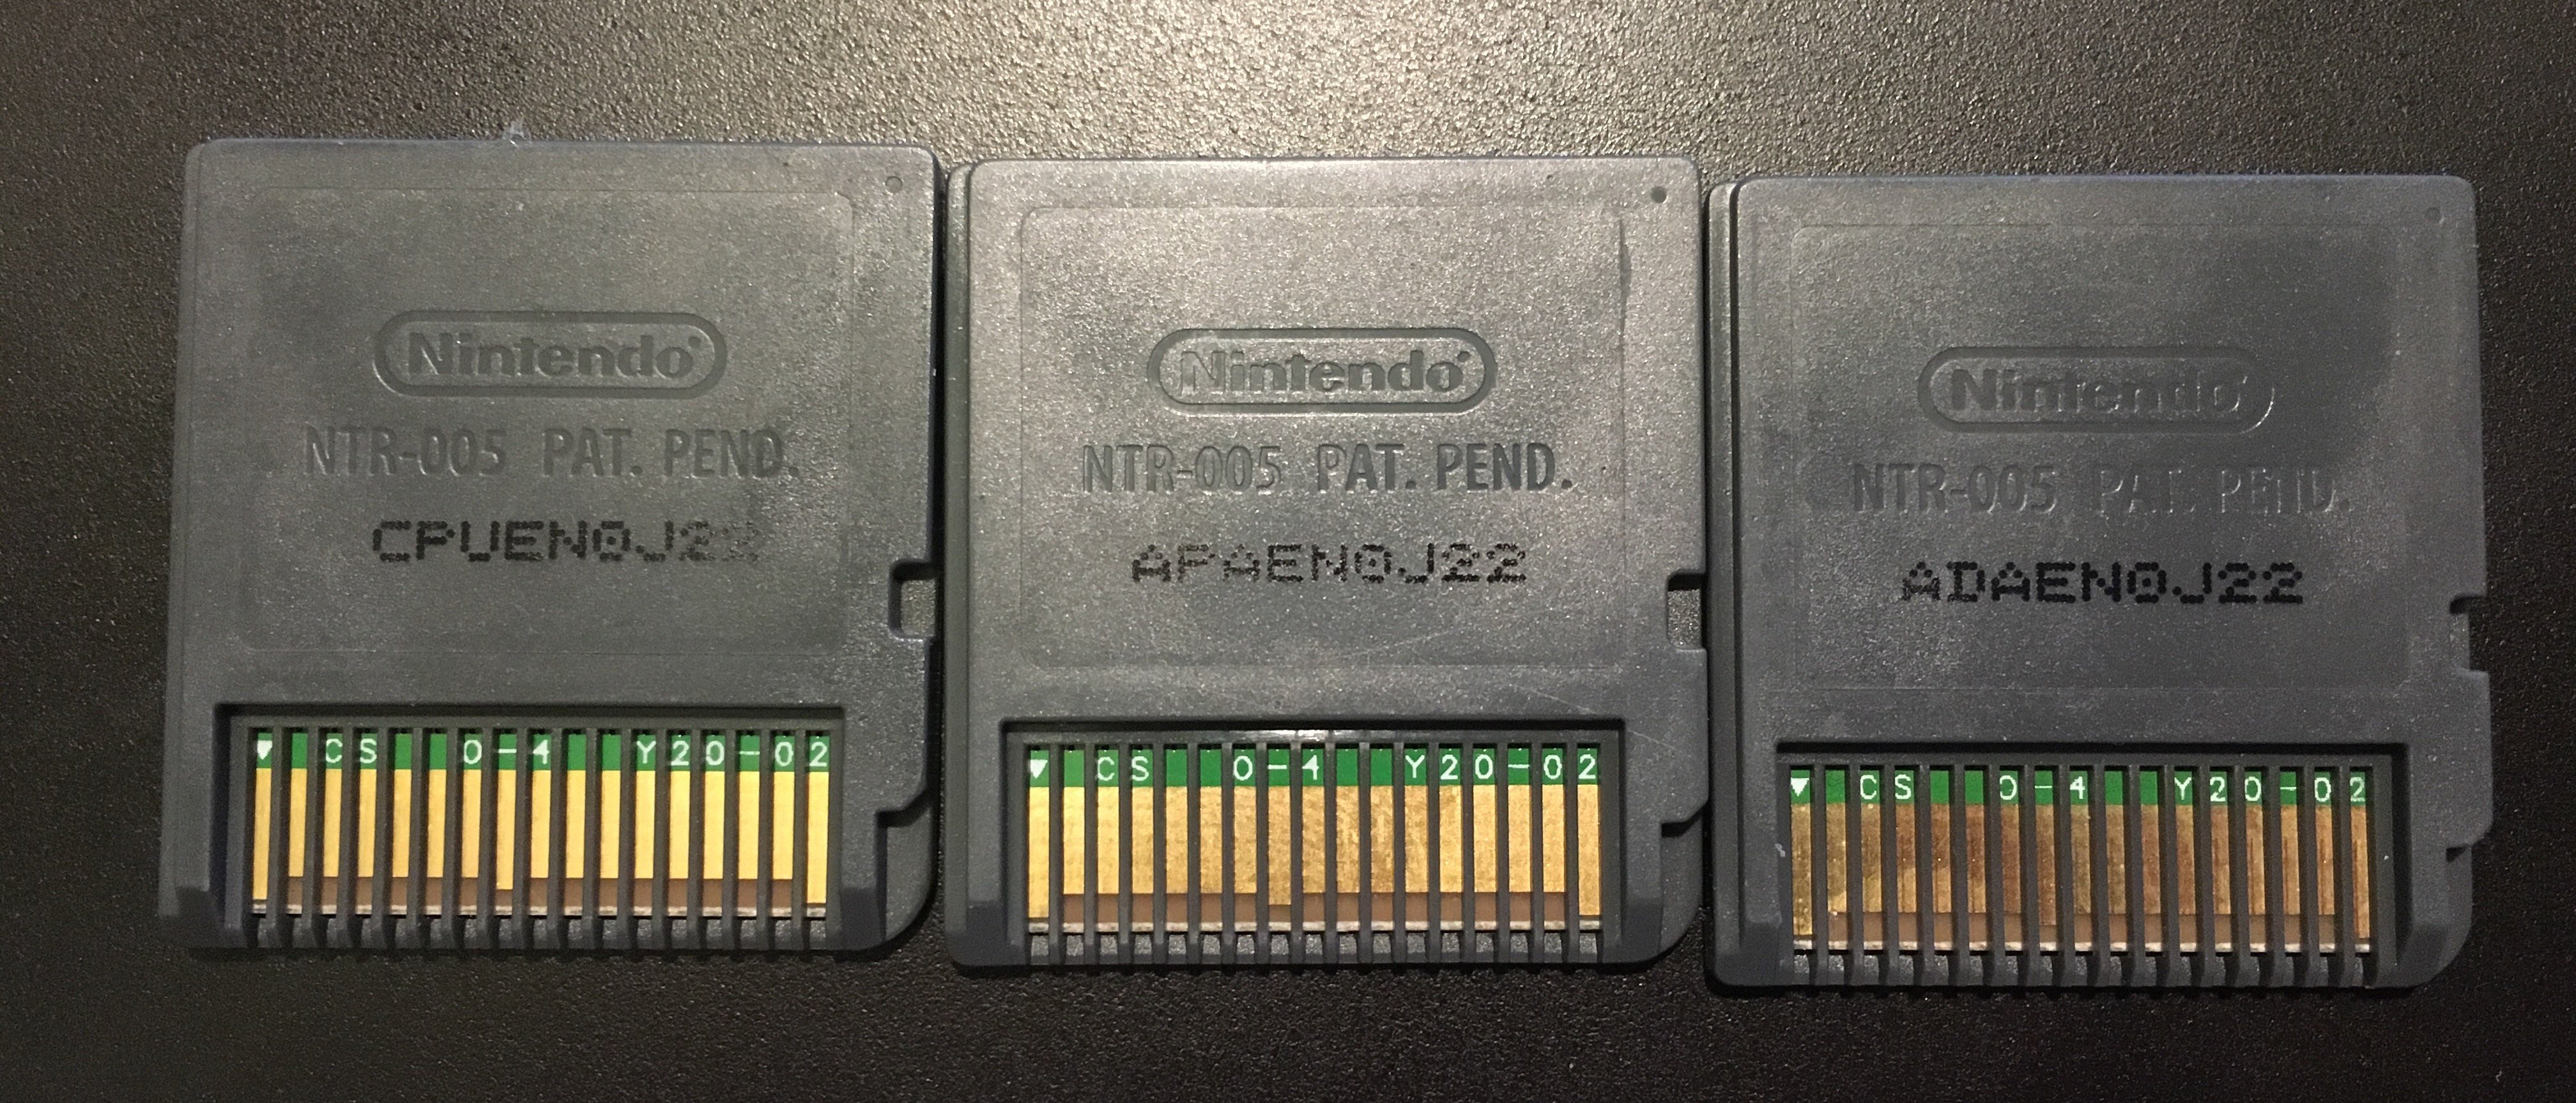 Are my Pokemon DS games fake or authentic? | GBAtemp.net - The Independent  Video Game Community